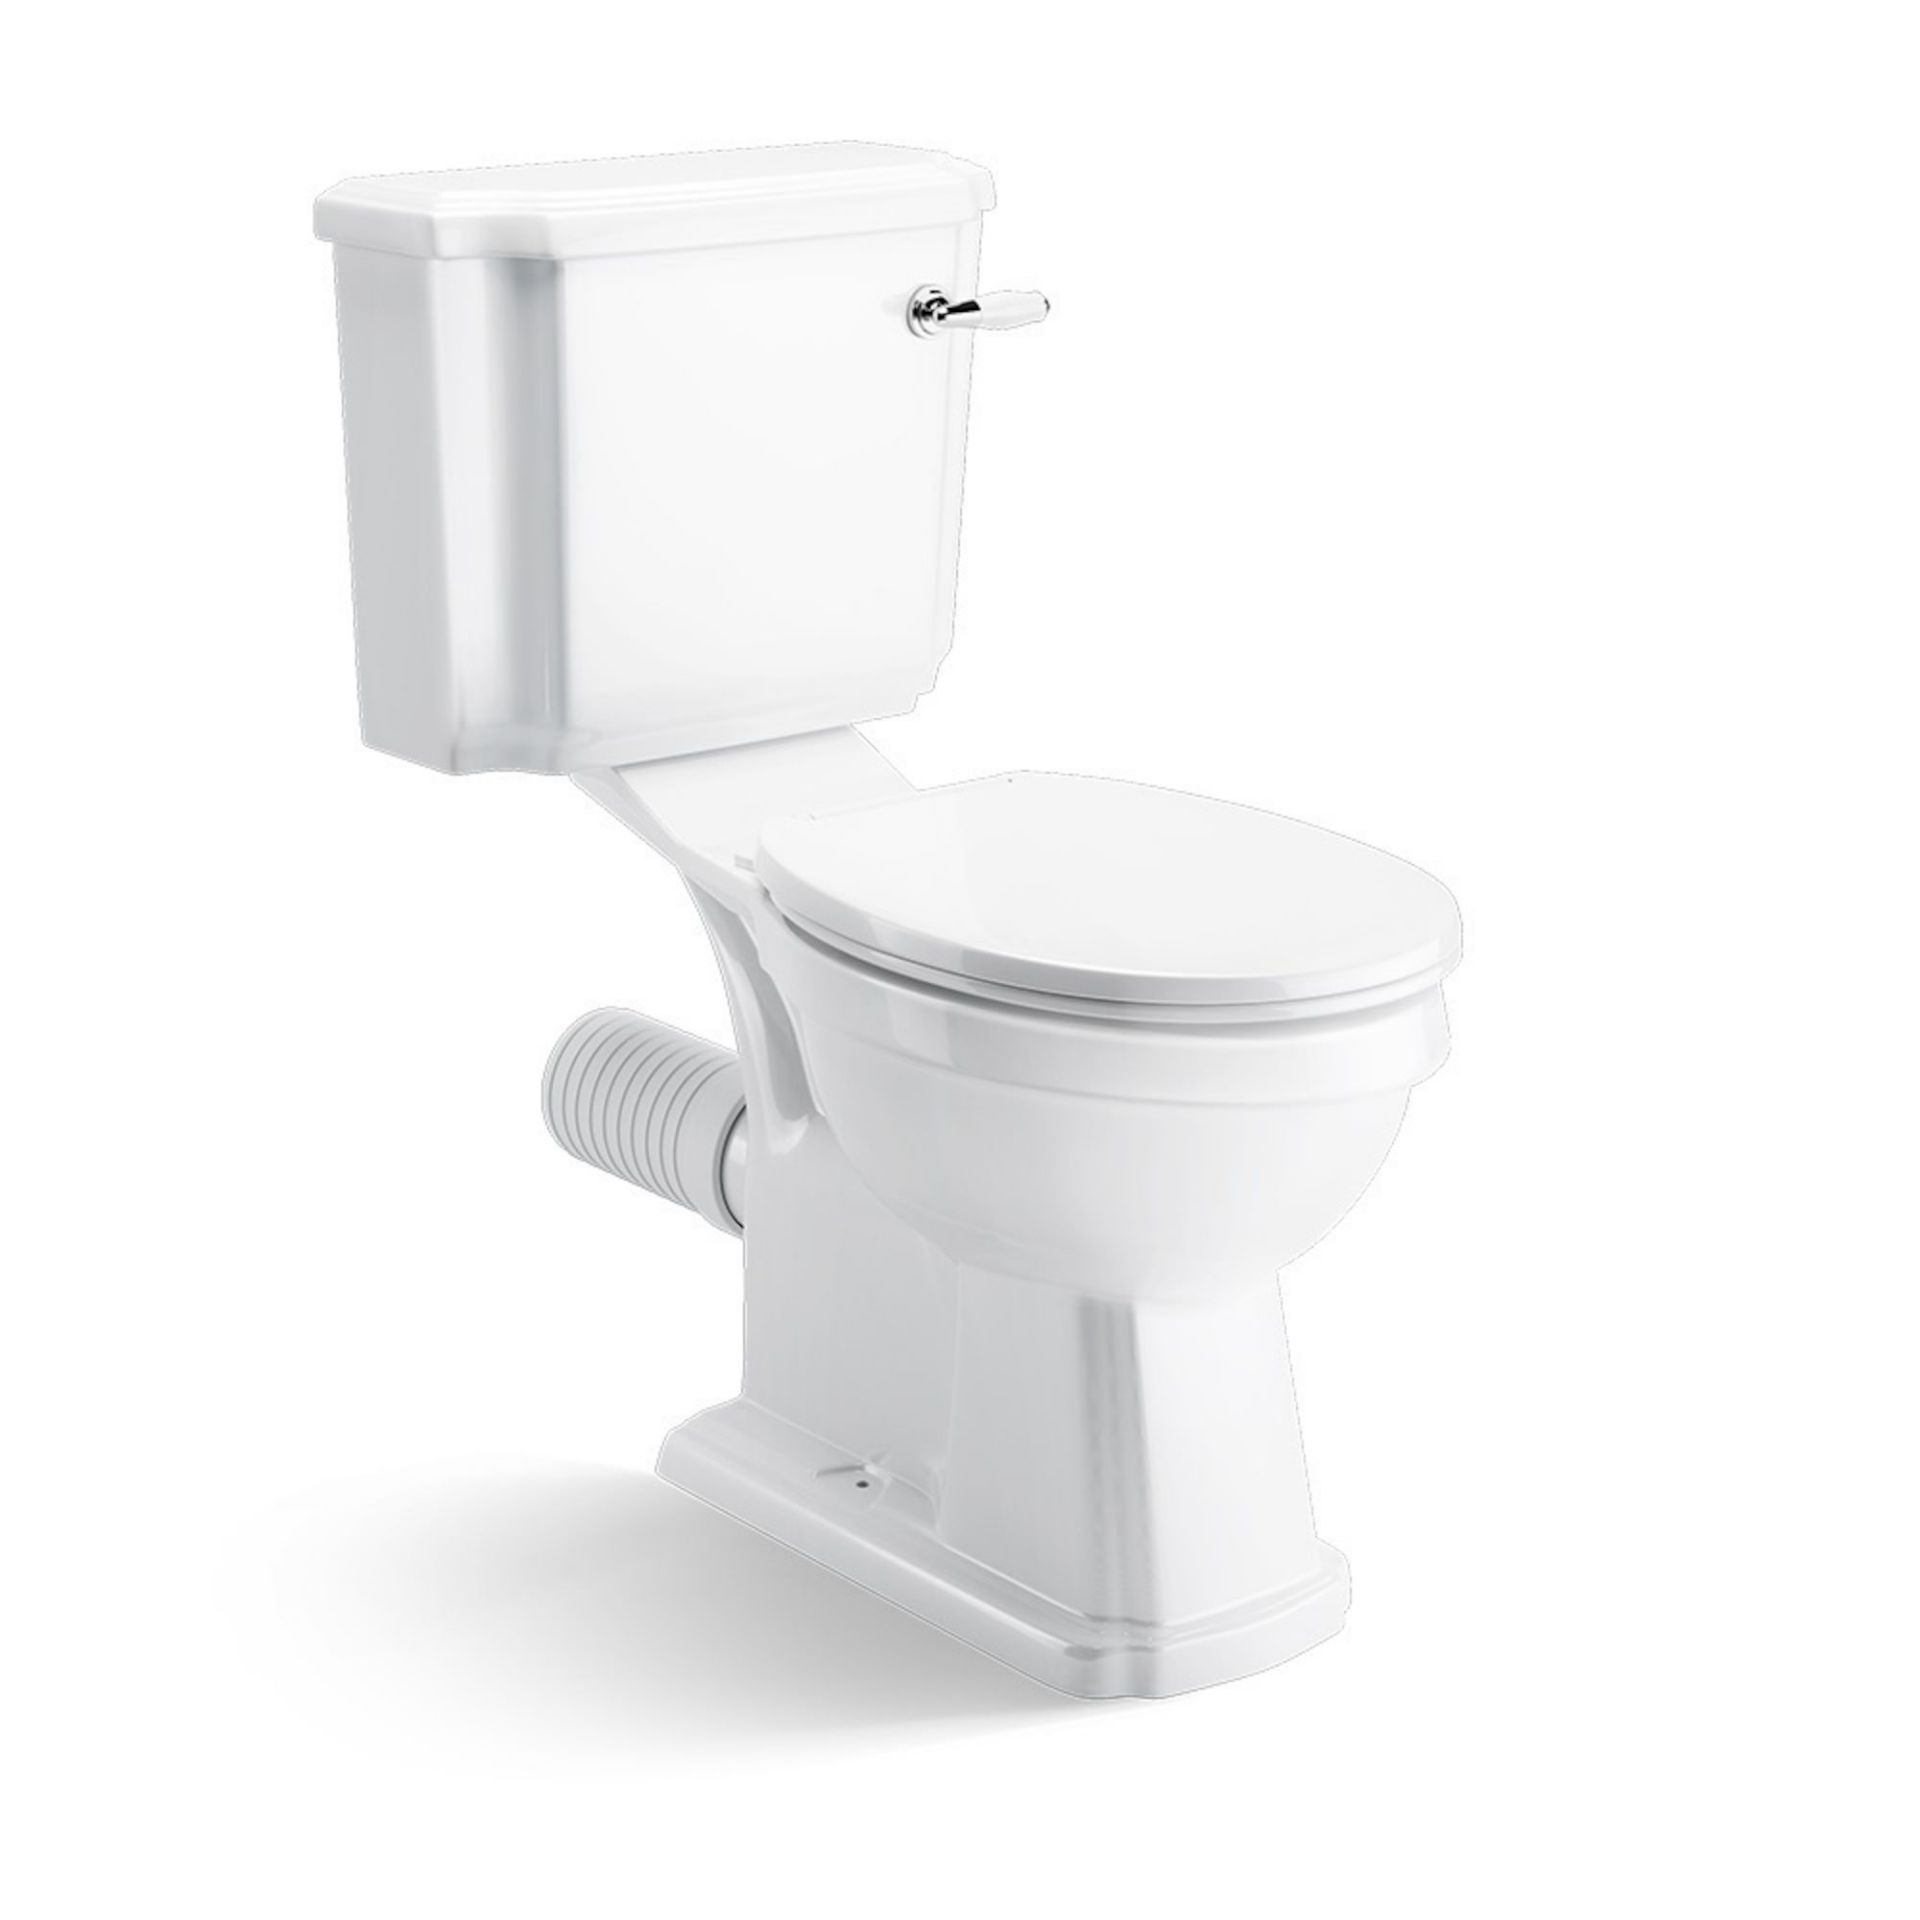 NEW & BOXED Cambridge Traditional Close Coupled Toilet & Cistern - White Seat. CCG629PAN.Trad... - Image 2 of 3